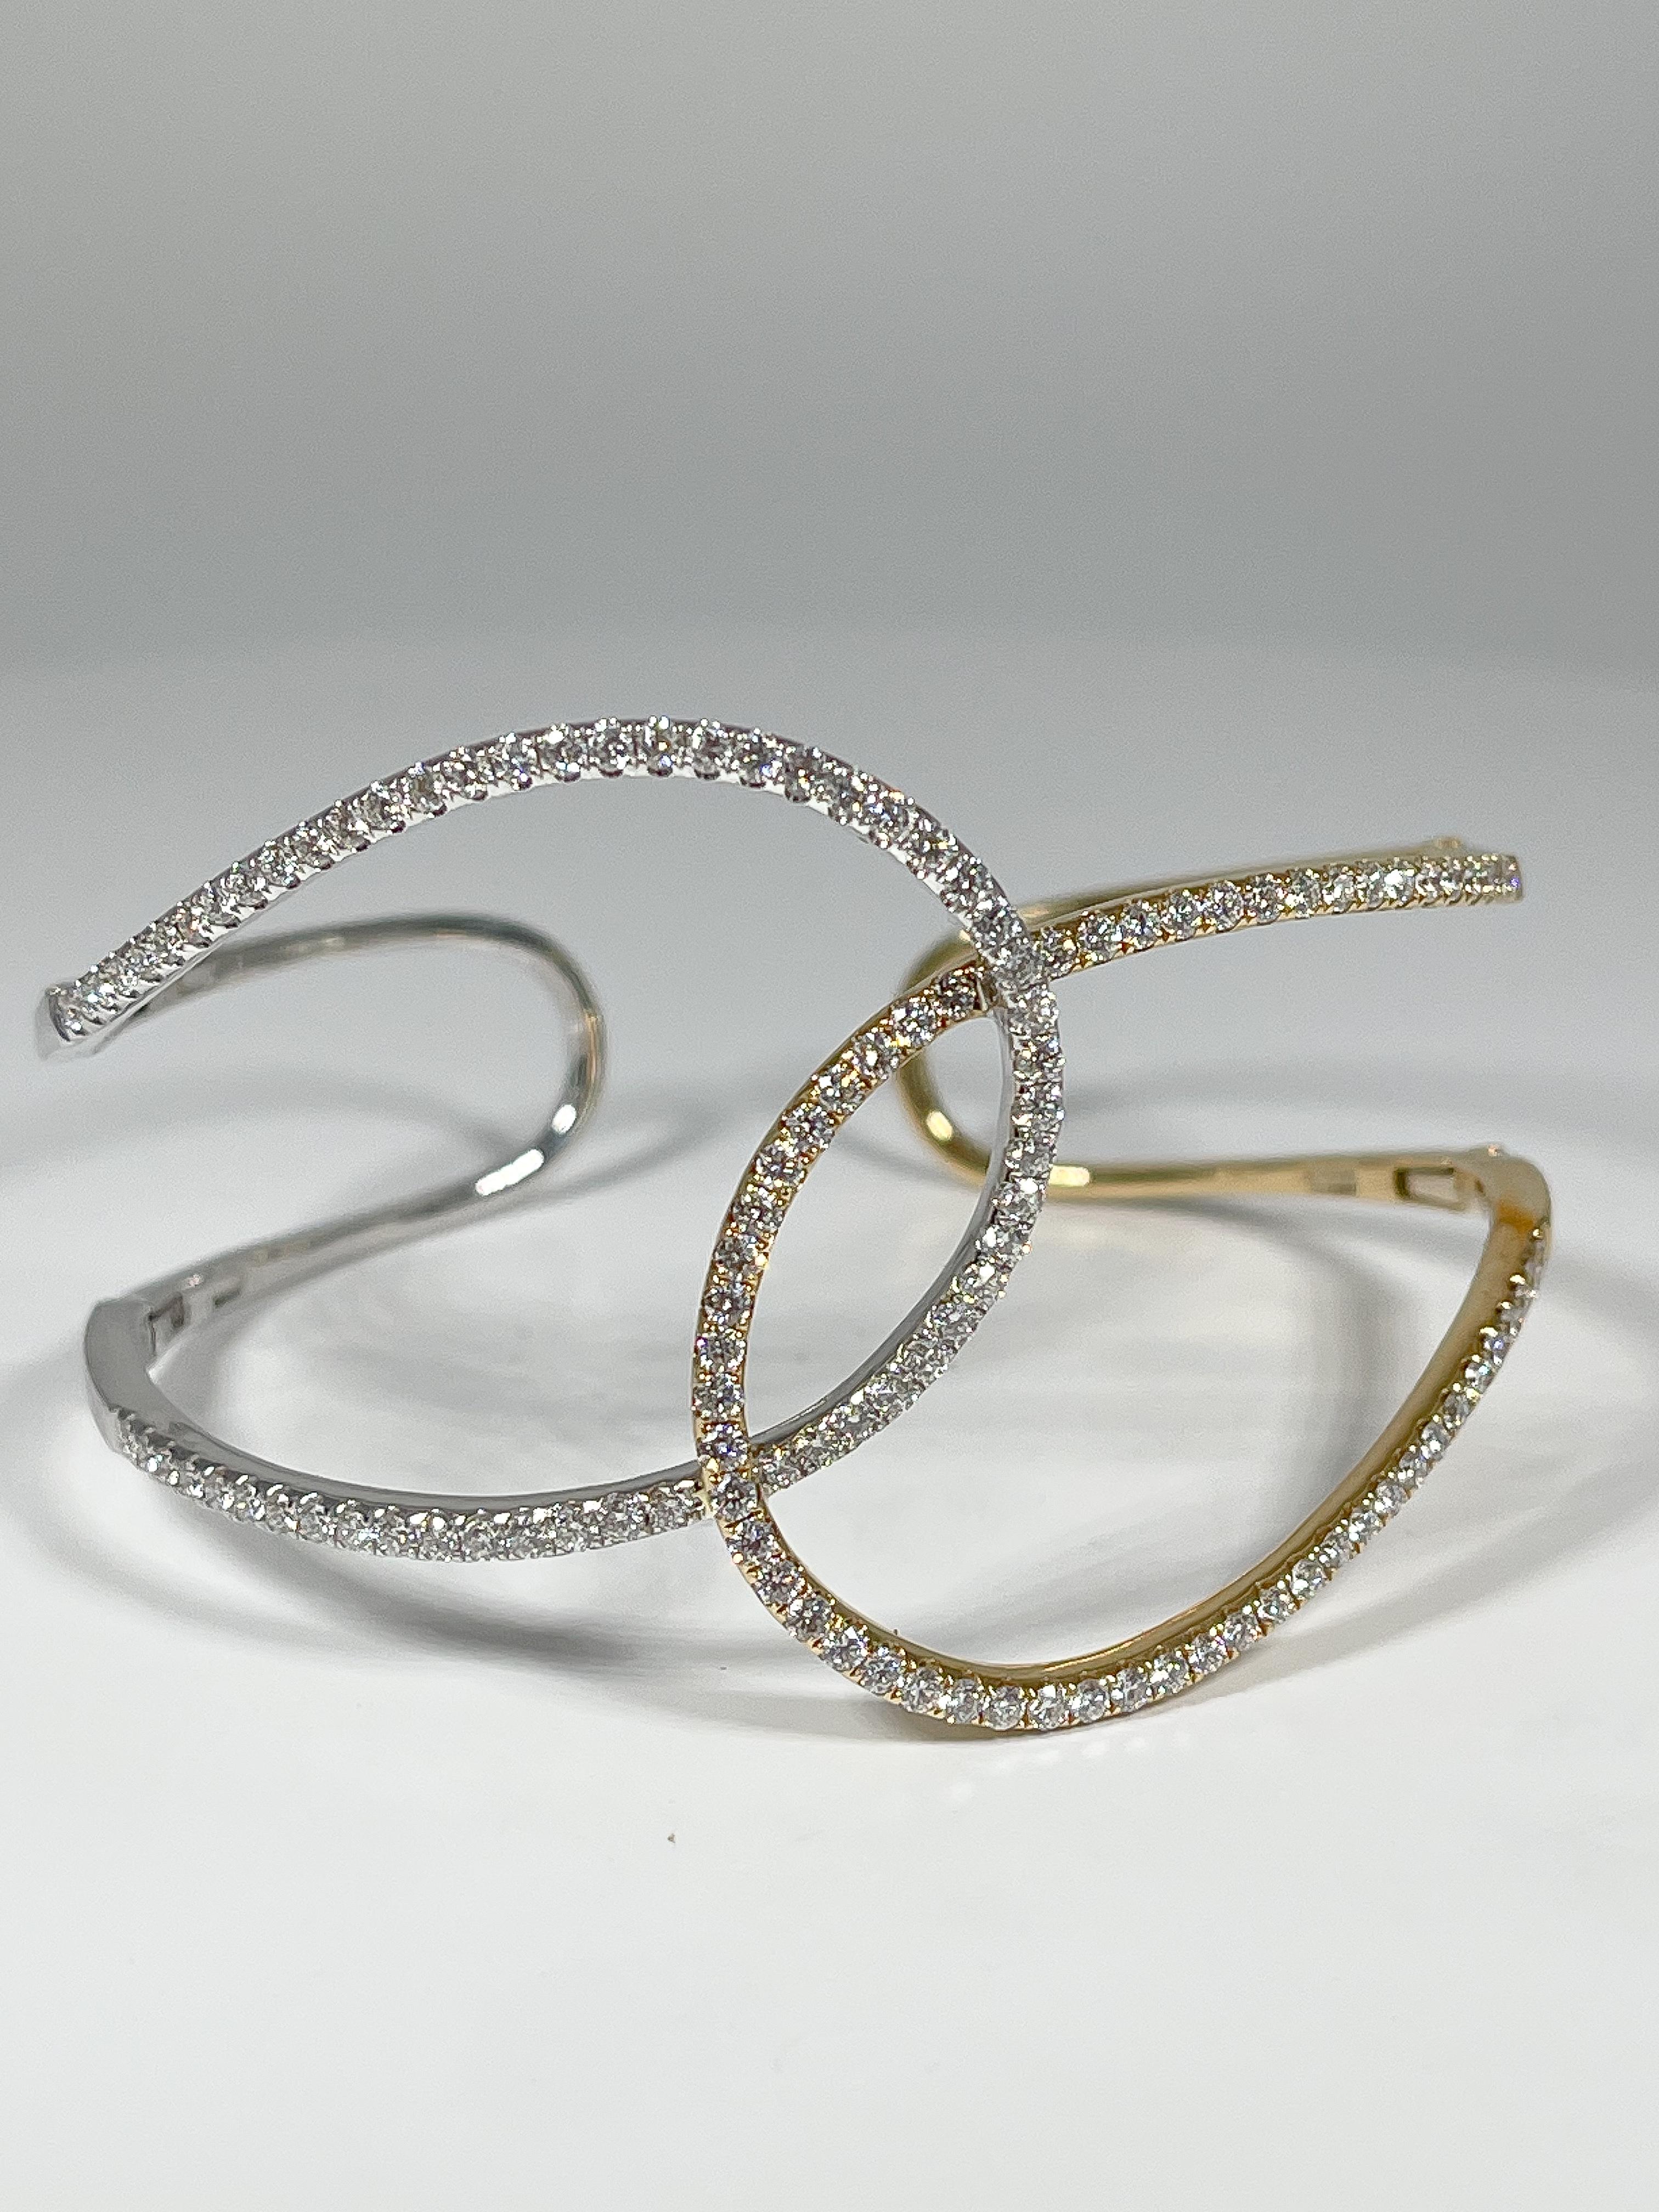 One of a kind 18k two toned white and yellow gold swirl bangle with diamonds, 2.32 ctw 
Retractable arms on bracelet for easy wearing
Will fit wrists up to size 7 1/2
1.5 inches wide 
Weight is 24.6 grams
Brand new condition, never worn